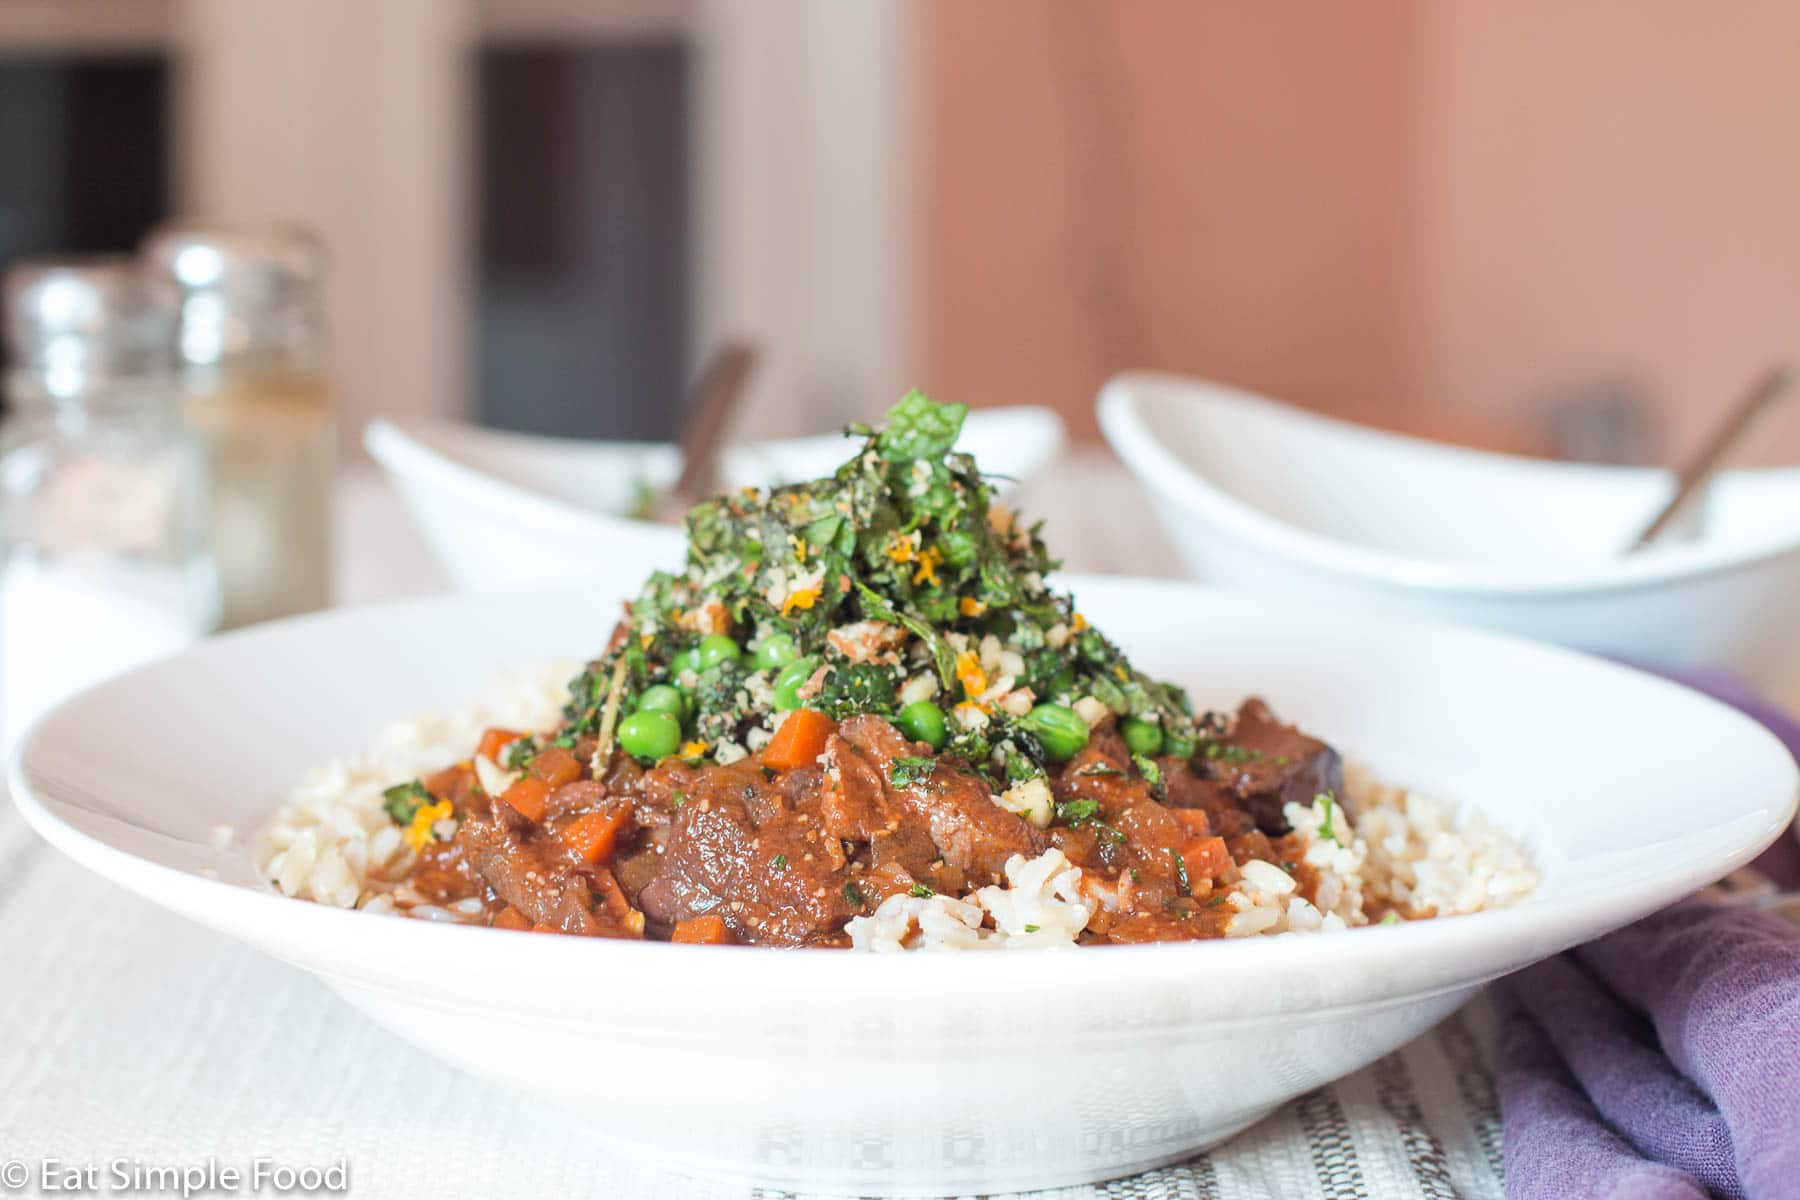 White shallow bowl (side view) of brown/red chunks of lamb with diced carrots and sauce over white rice with a pea, mint, and almond garnish.